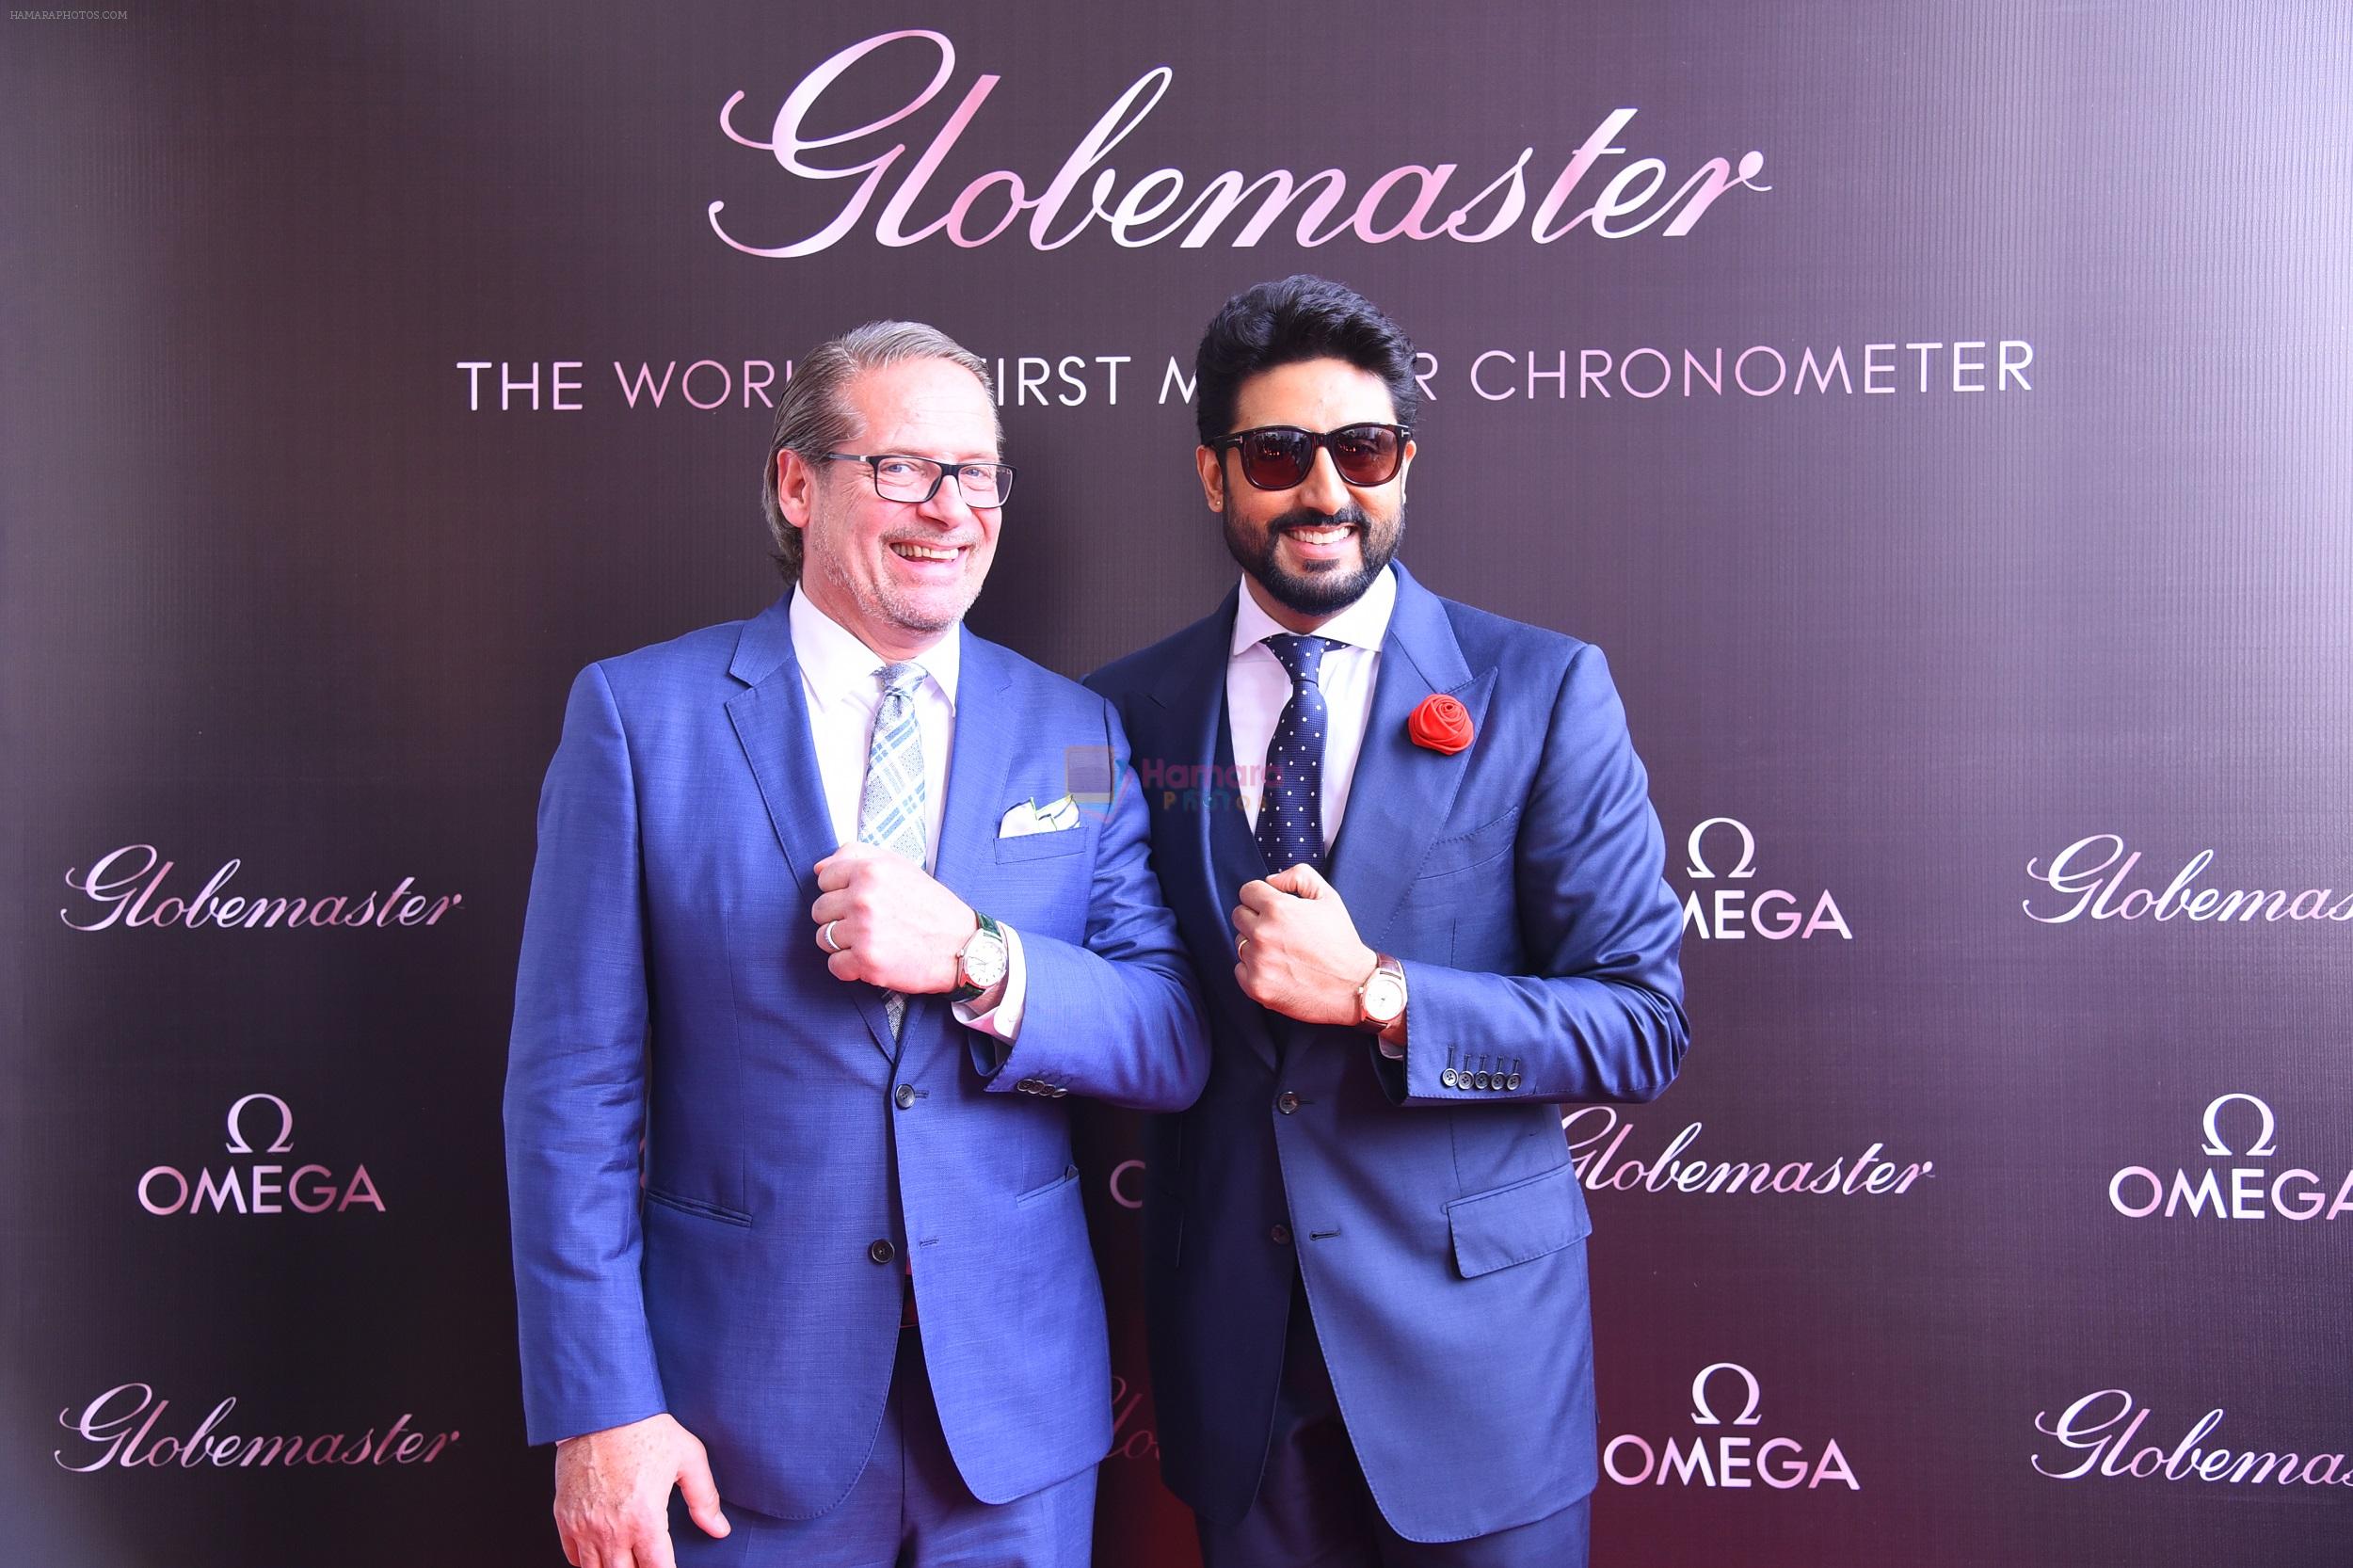 Abhishek Bachchan joins OMEGA in Delhi to celebrate the success of the World�s First Master Chronometer on 18th Nov 2016